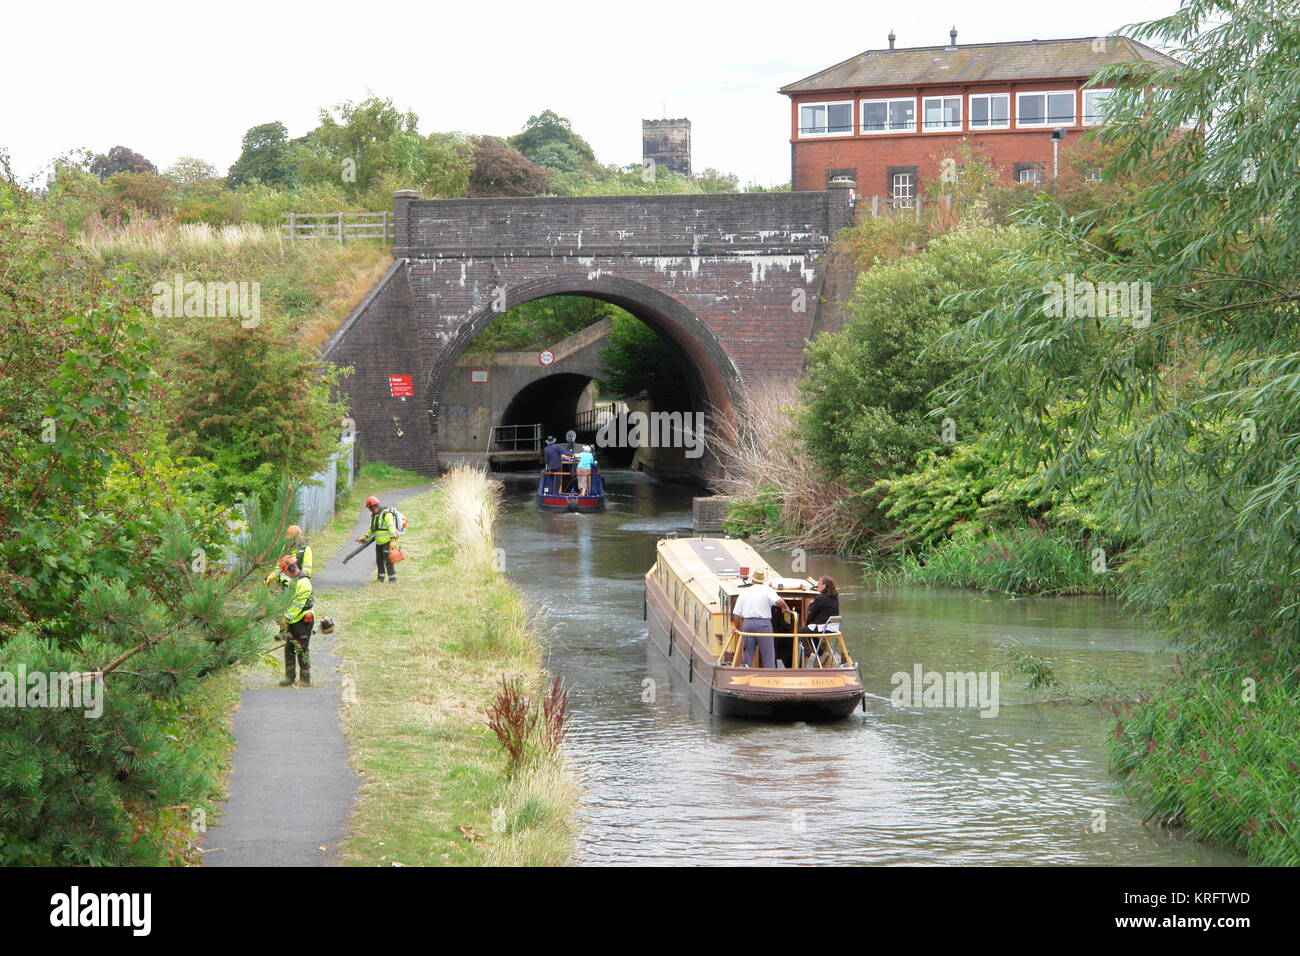 Approaching railway junction bridges, Droitwich Barge Canal, Droitwich, Worcestershire.  With barges on the water, and men cutting back the undergrowth on the left-hand path. Stock Photo